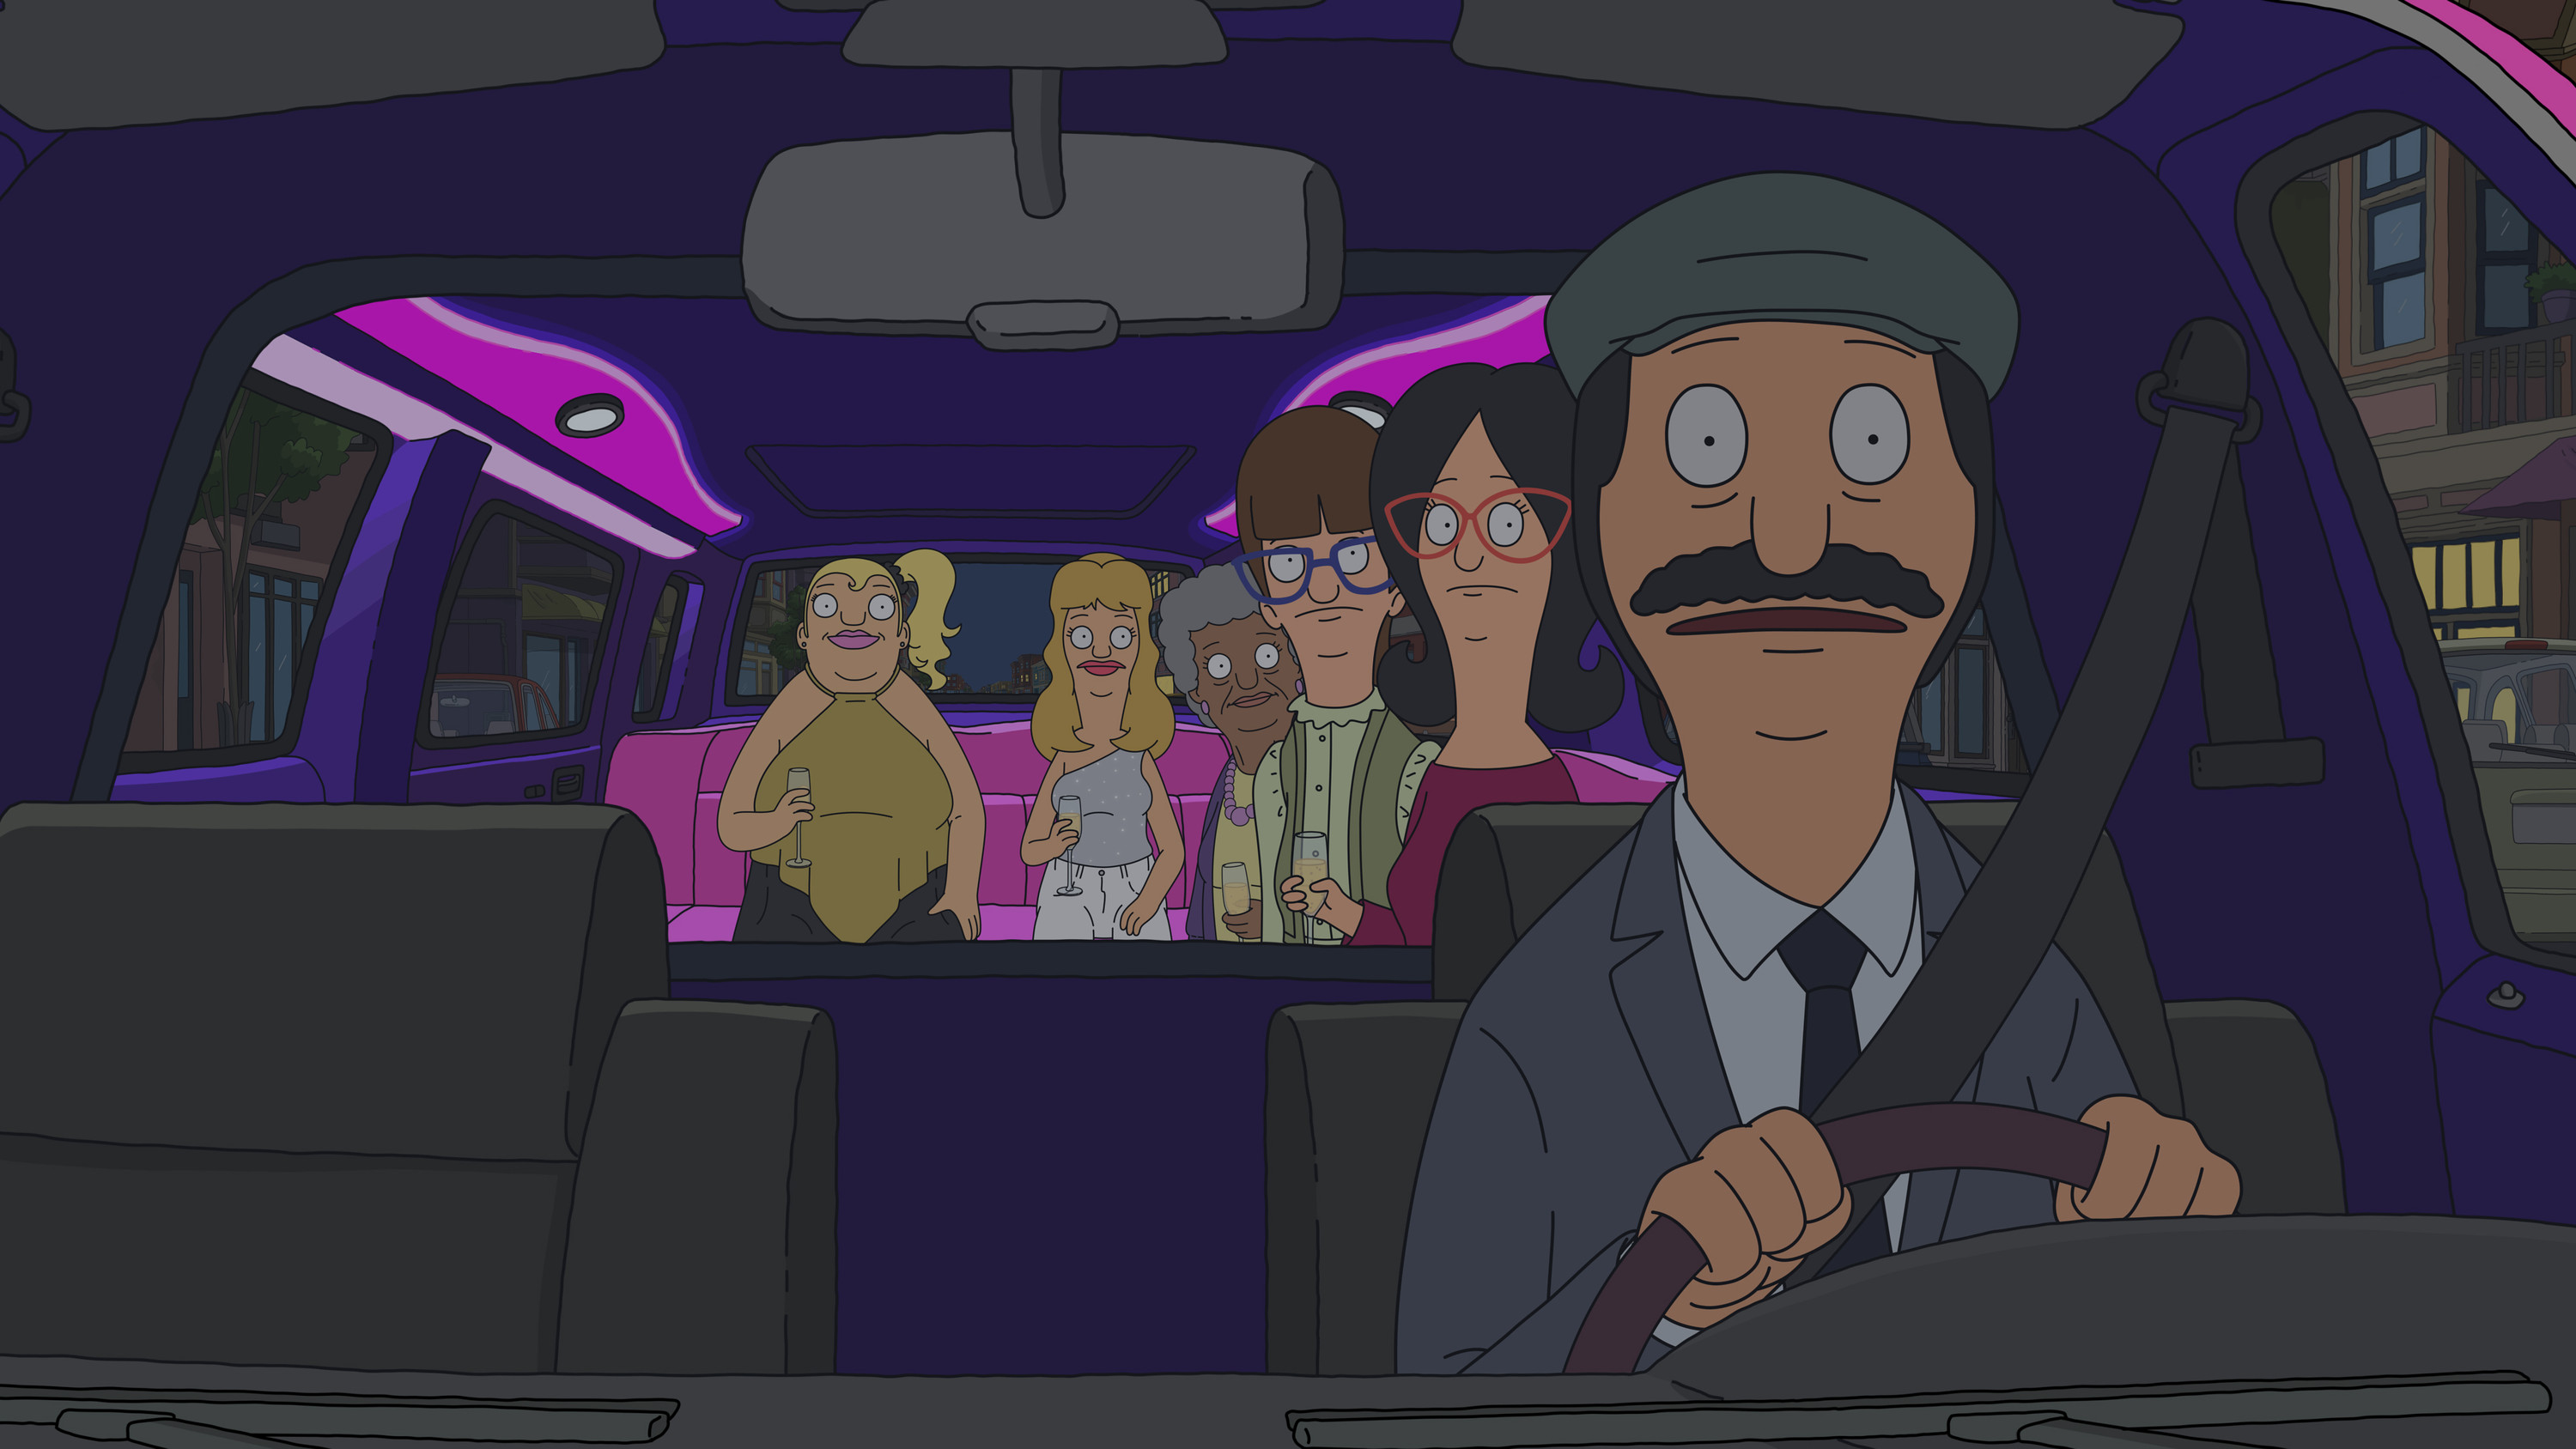 Who else was SUPER excited to see a Rudy episode? : r/BobsBurgers